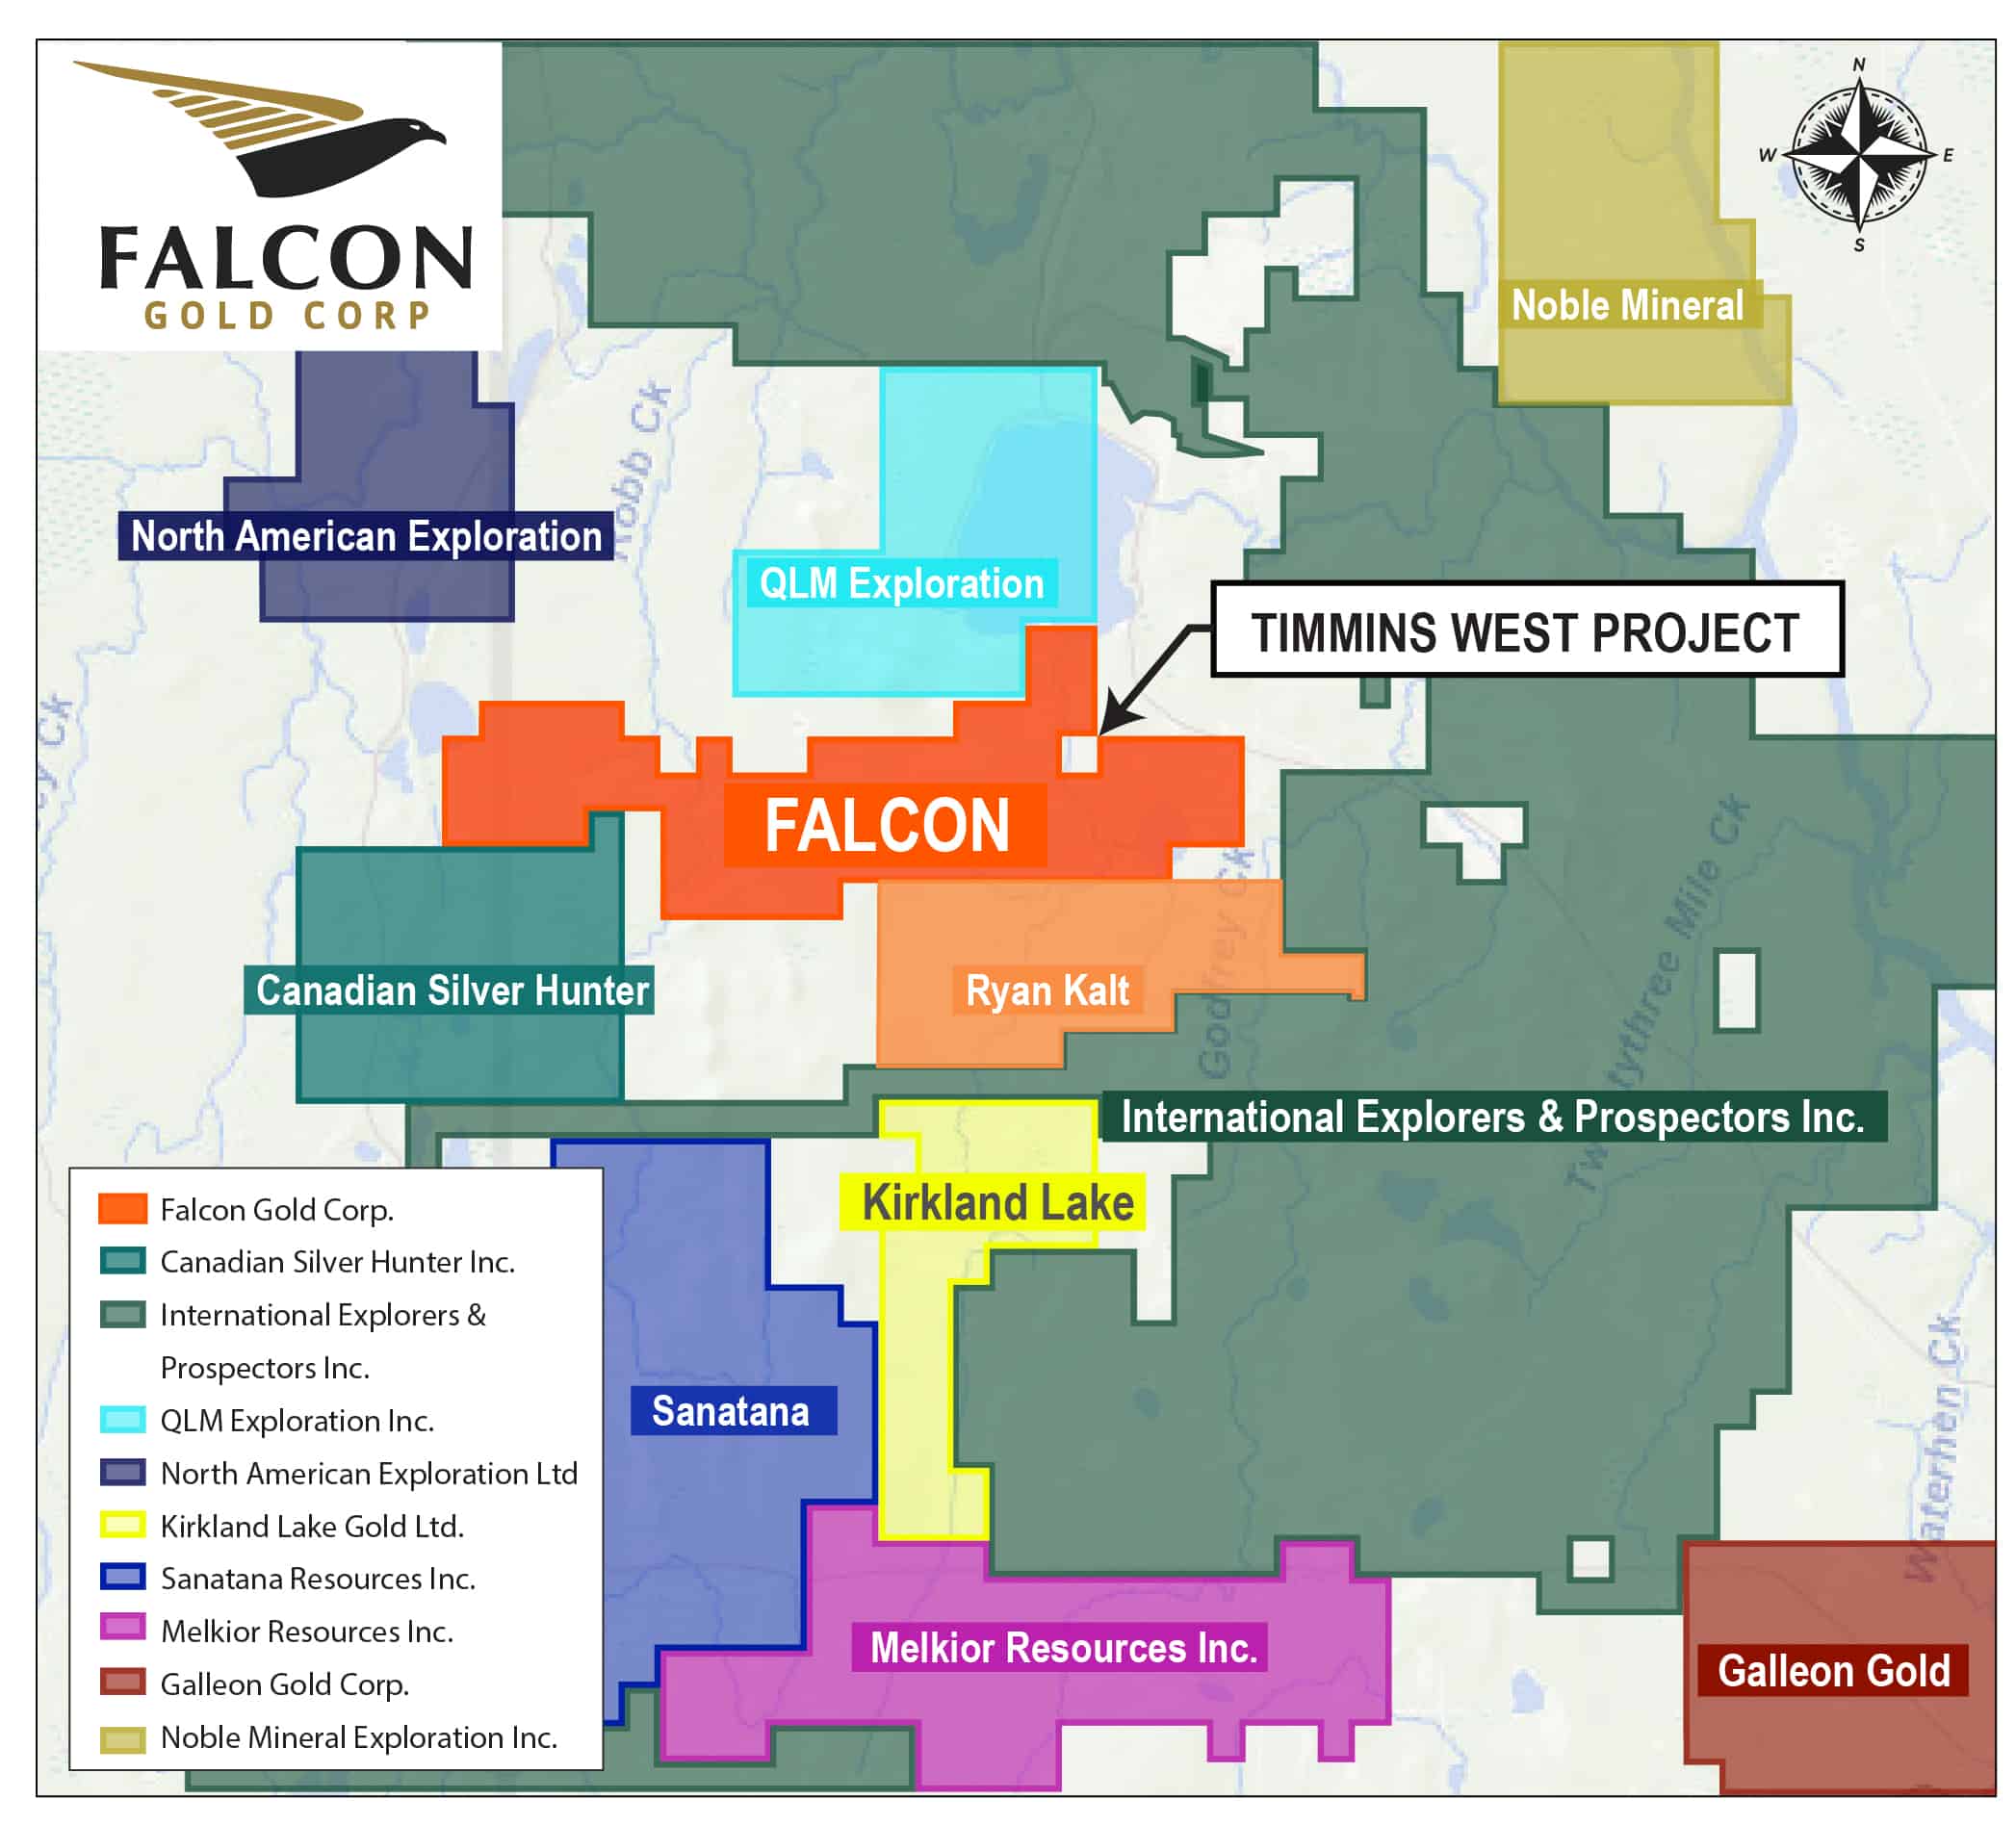 Timmins West Property Falcon Gold Corp Timmins West Property The KGC shares many similarities to other well-known complexes such as the Bushveld Complex (South Africa), the Stillwater Complex (USA) and Bell River Dore Lake Complexes (Quebec) (Barrie, 2000). The Timmins West Ni-Cu-Co property has historically been explored for gold. However, it’s mafic to ultra-mafic composition within the KGC makes it a prime target for magmatic Ni-Cu-Co mineralization. The regional government flown magnetic signature of the KGC suggests a possible layer within the KGC that has the potential to a host a pyrrhotite-rich cumulate layer host to Ni-Cu-Co mineralization. An outcrop grab sample in (AFRI 42A12SE2024, sample 185247) taken in 2004 reported 0.44% Ni, 0.645% Cu, 332 ppm Co, 0.053 g/t Au and 3 g/t Ag. This sample was associated with 10% pyrrhotite in a gabbroic mafic outcrop. Eight (8) additional samples within 15 m of the 185247 also reported anomalous Ni-Cu-Co values.